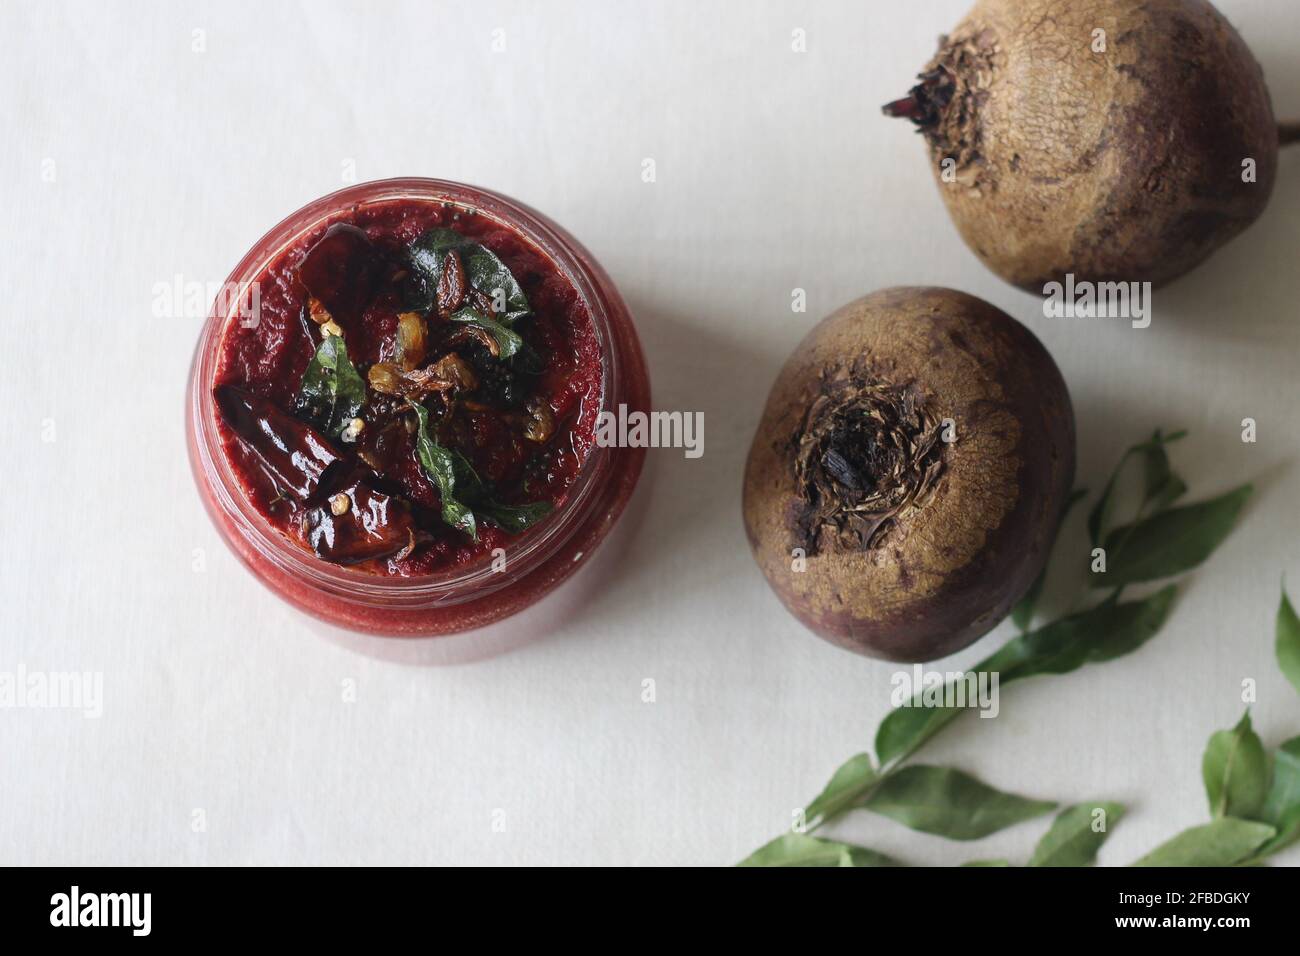 Homemade fresh spicy and sweet condiment made with beetroot, chillies, coconut shallots and spices. Locally known as Beetroot coconut chutney. Shot on Stock Photo